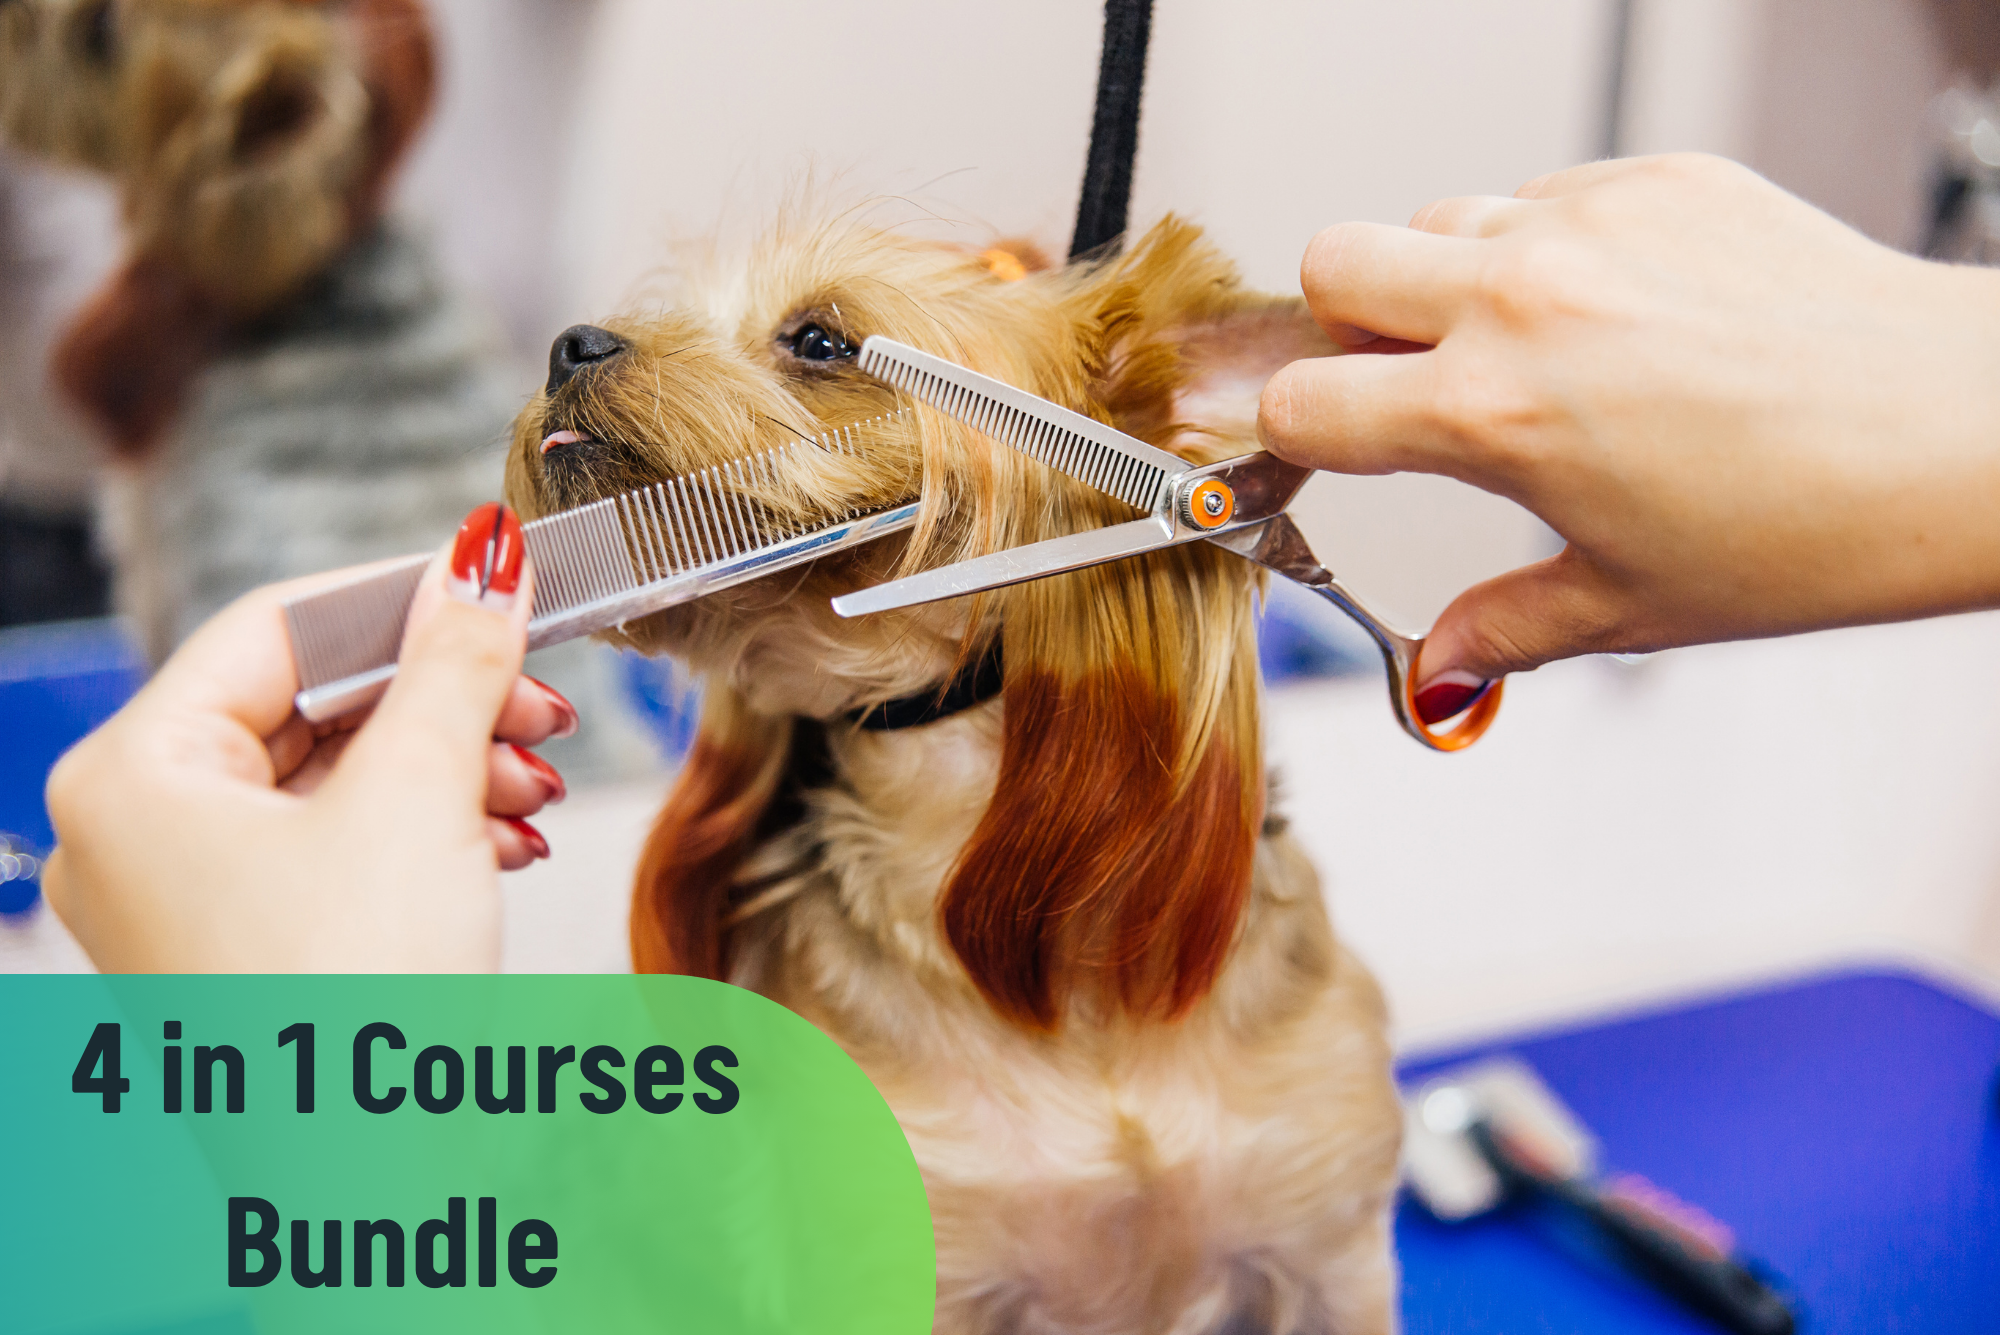 Dog Grooming and Dog Care Training